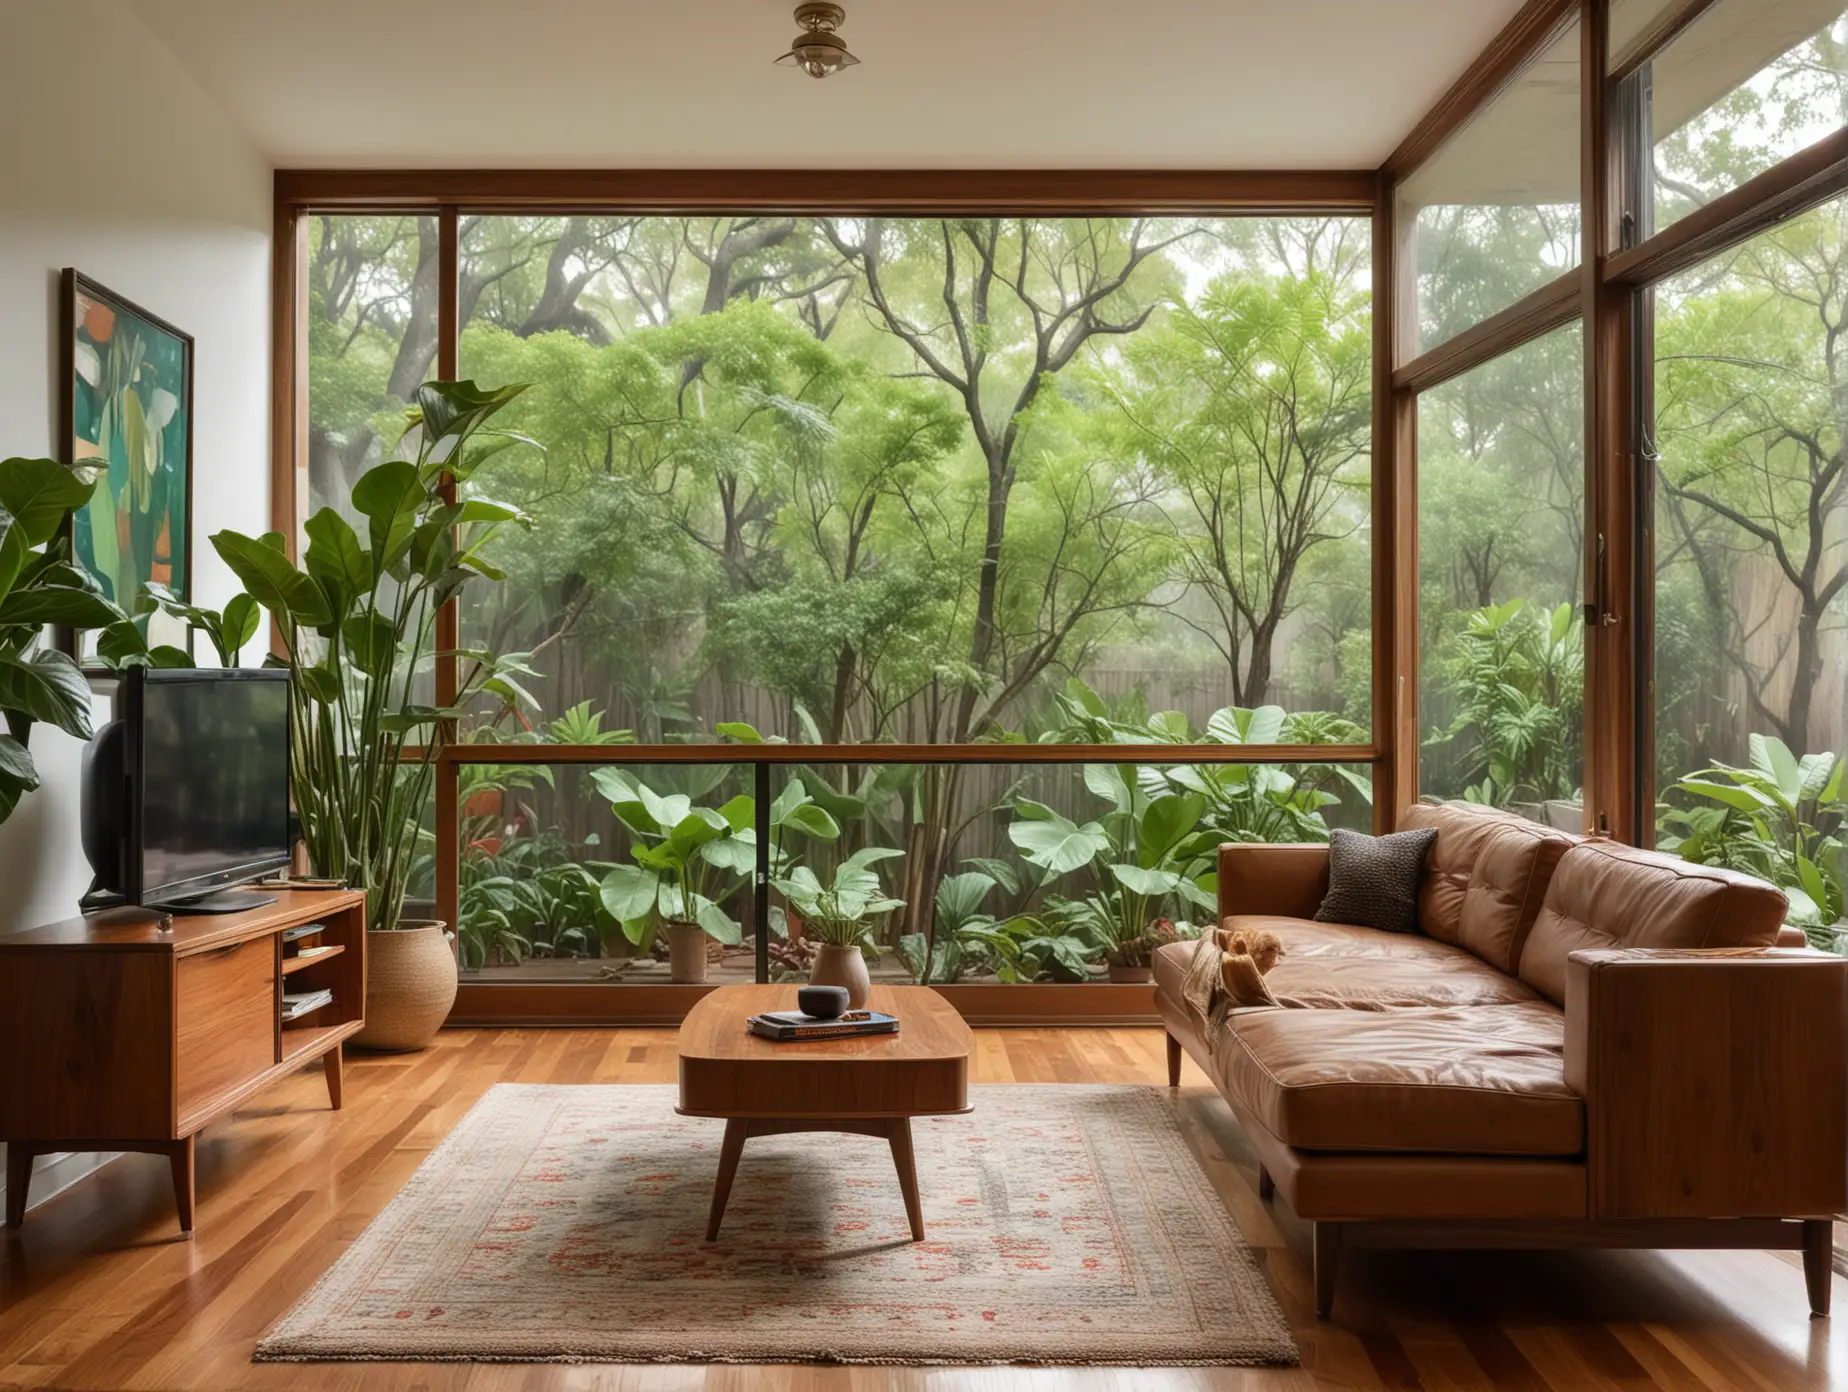 A mid-century modern living room with l-section sofas bathed in shades of brown and green, featuring wooden floors, a walnut credenza, house plants like fiddle leaf figs, and a panoramic window offering a view of the backyard under a gentle rain.